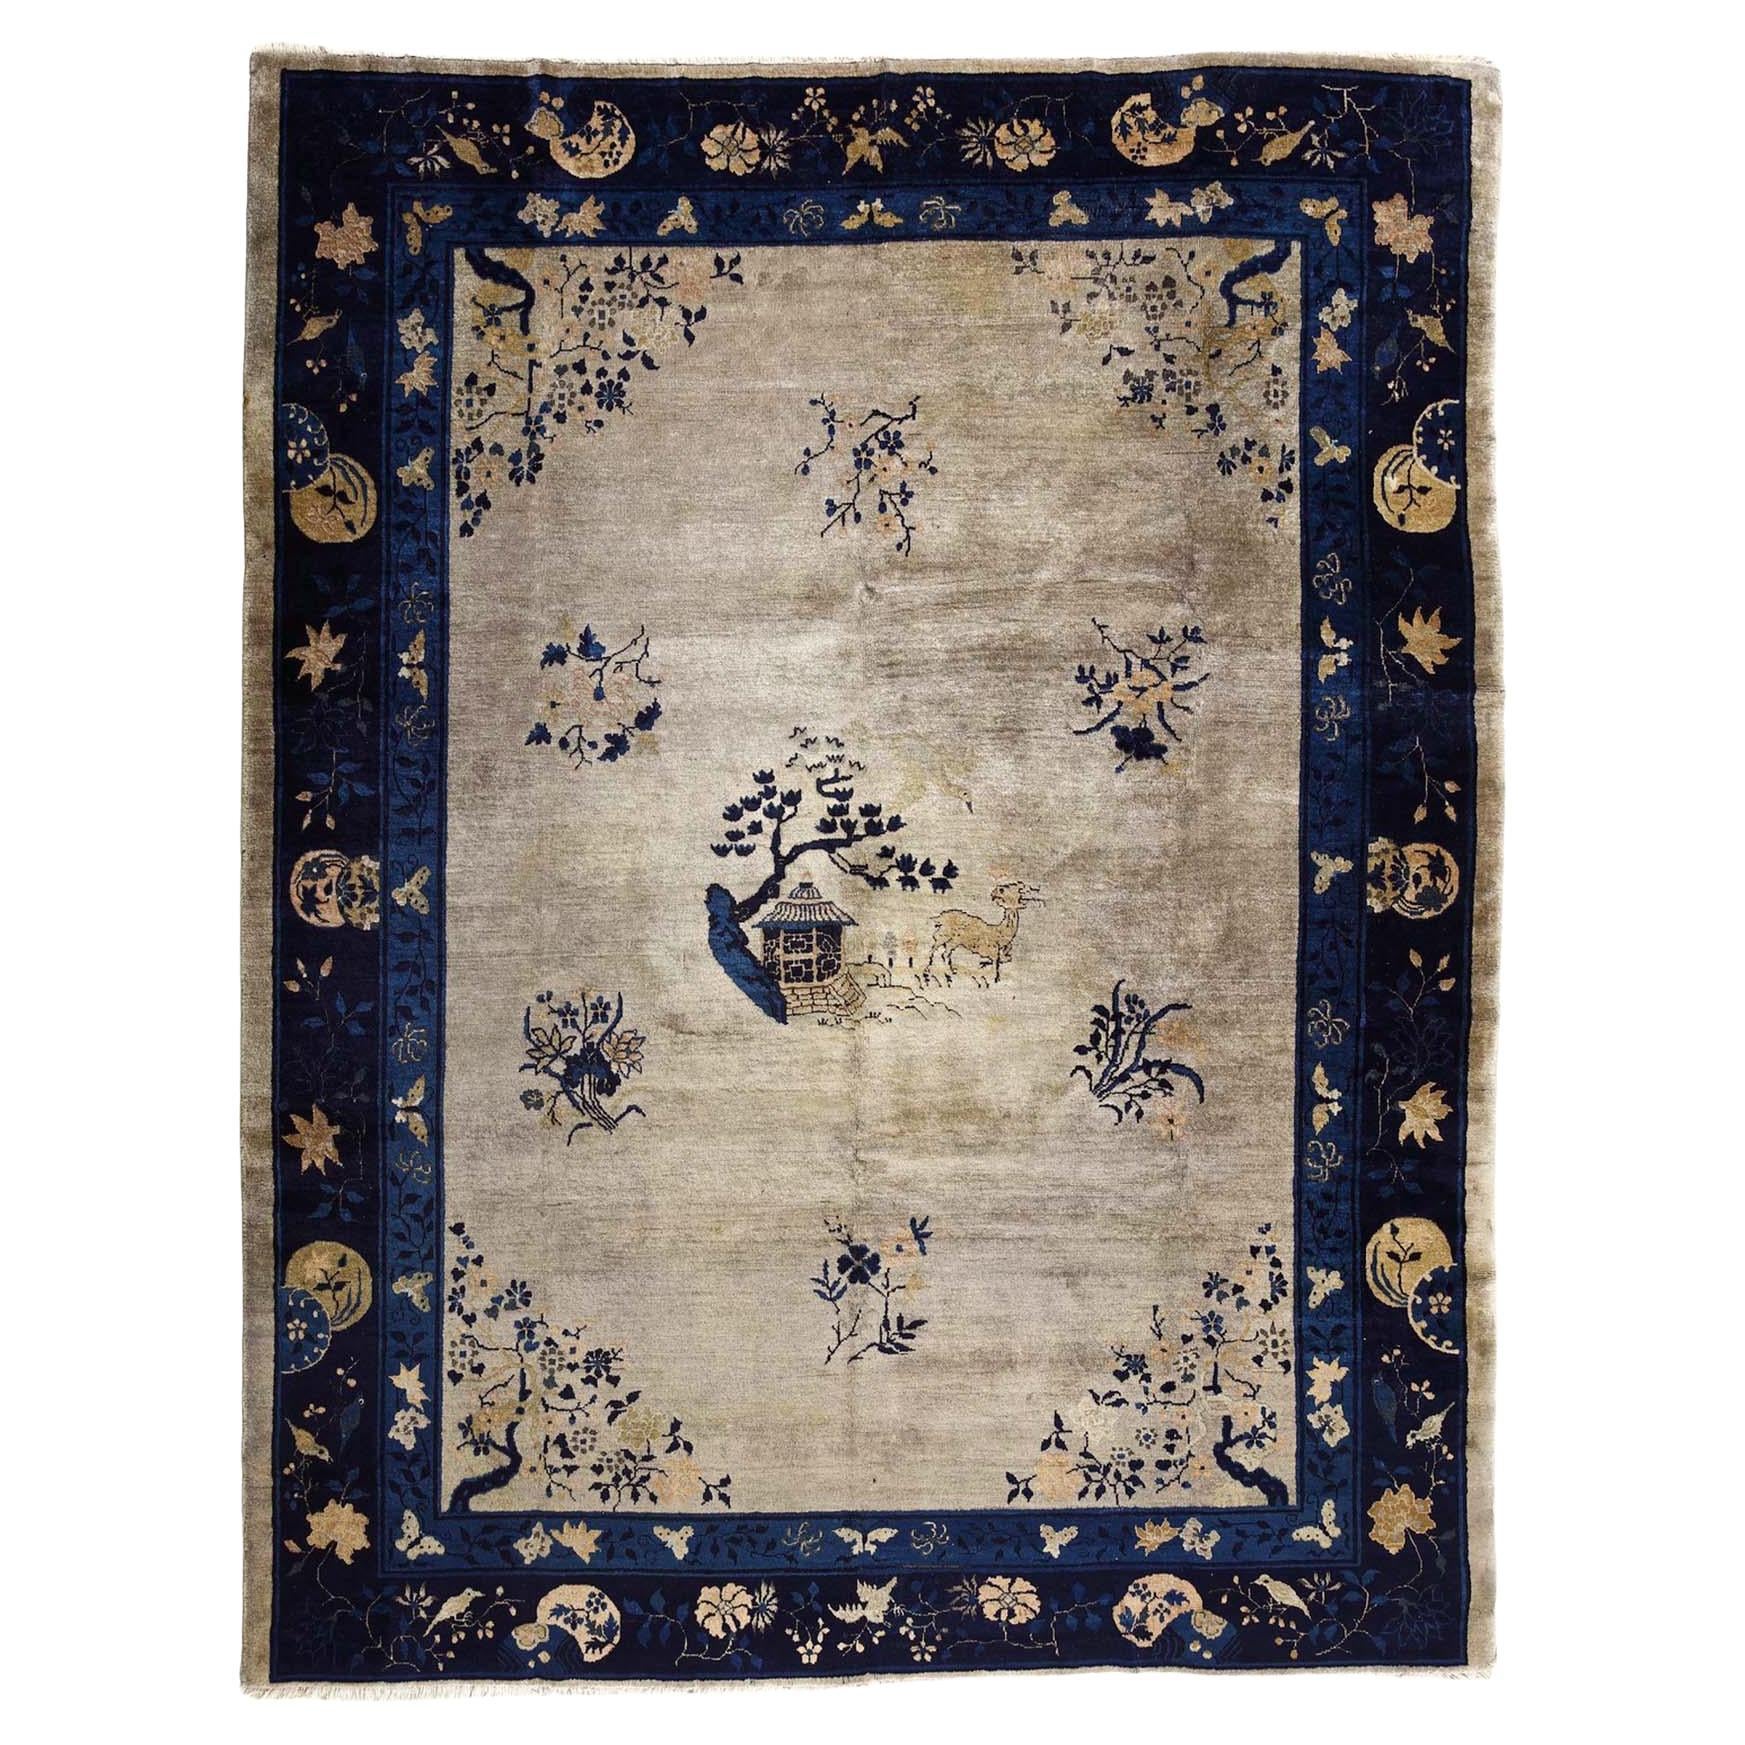 Antique Chinese Peking blue carpet, Hand-knotted 